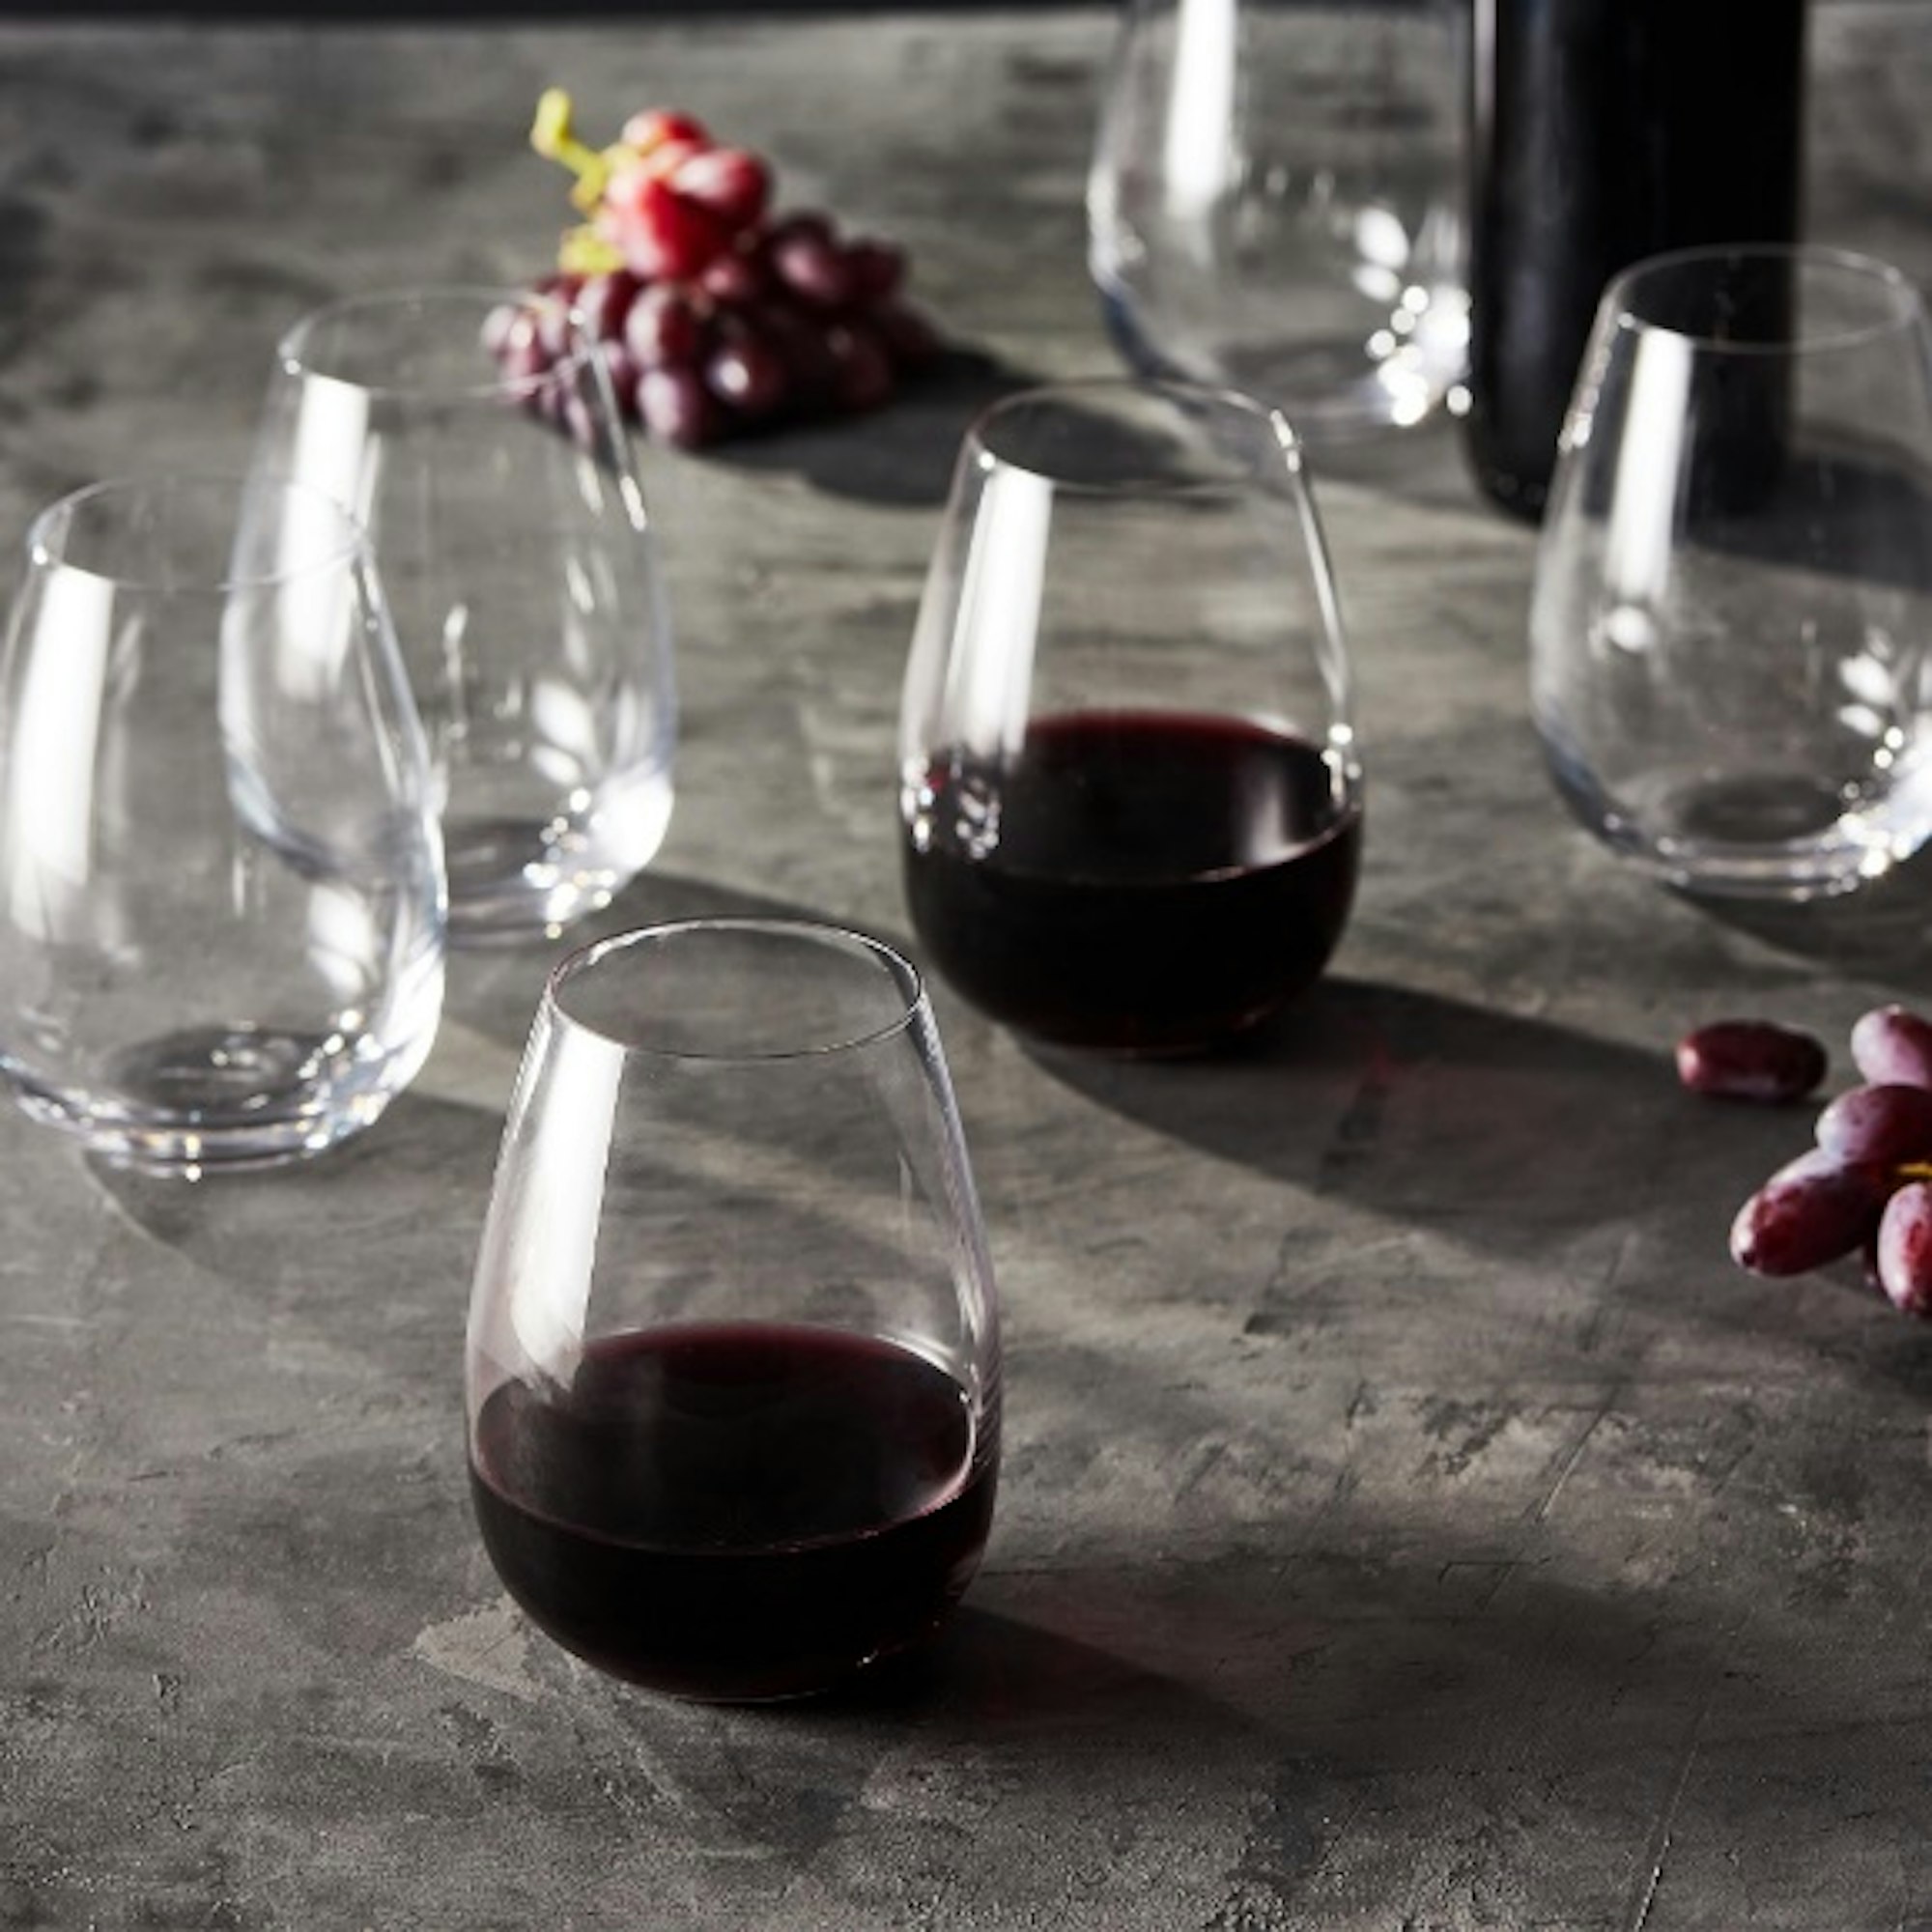 stemless wine glasses filled with red wine